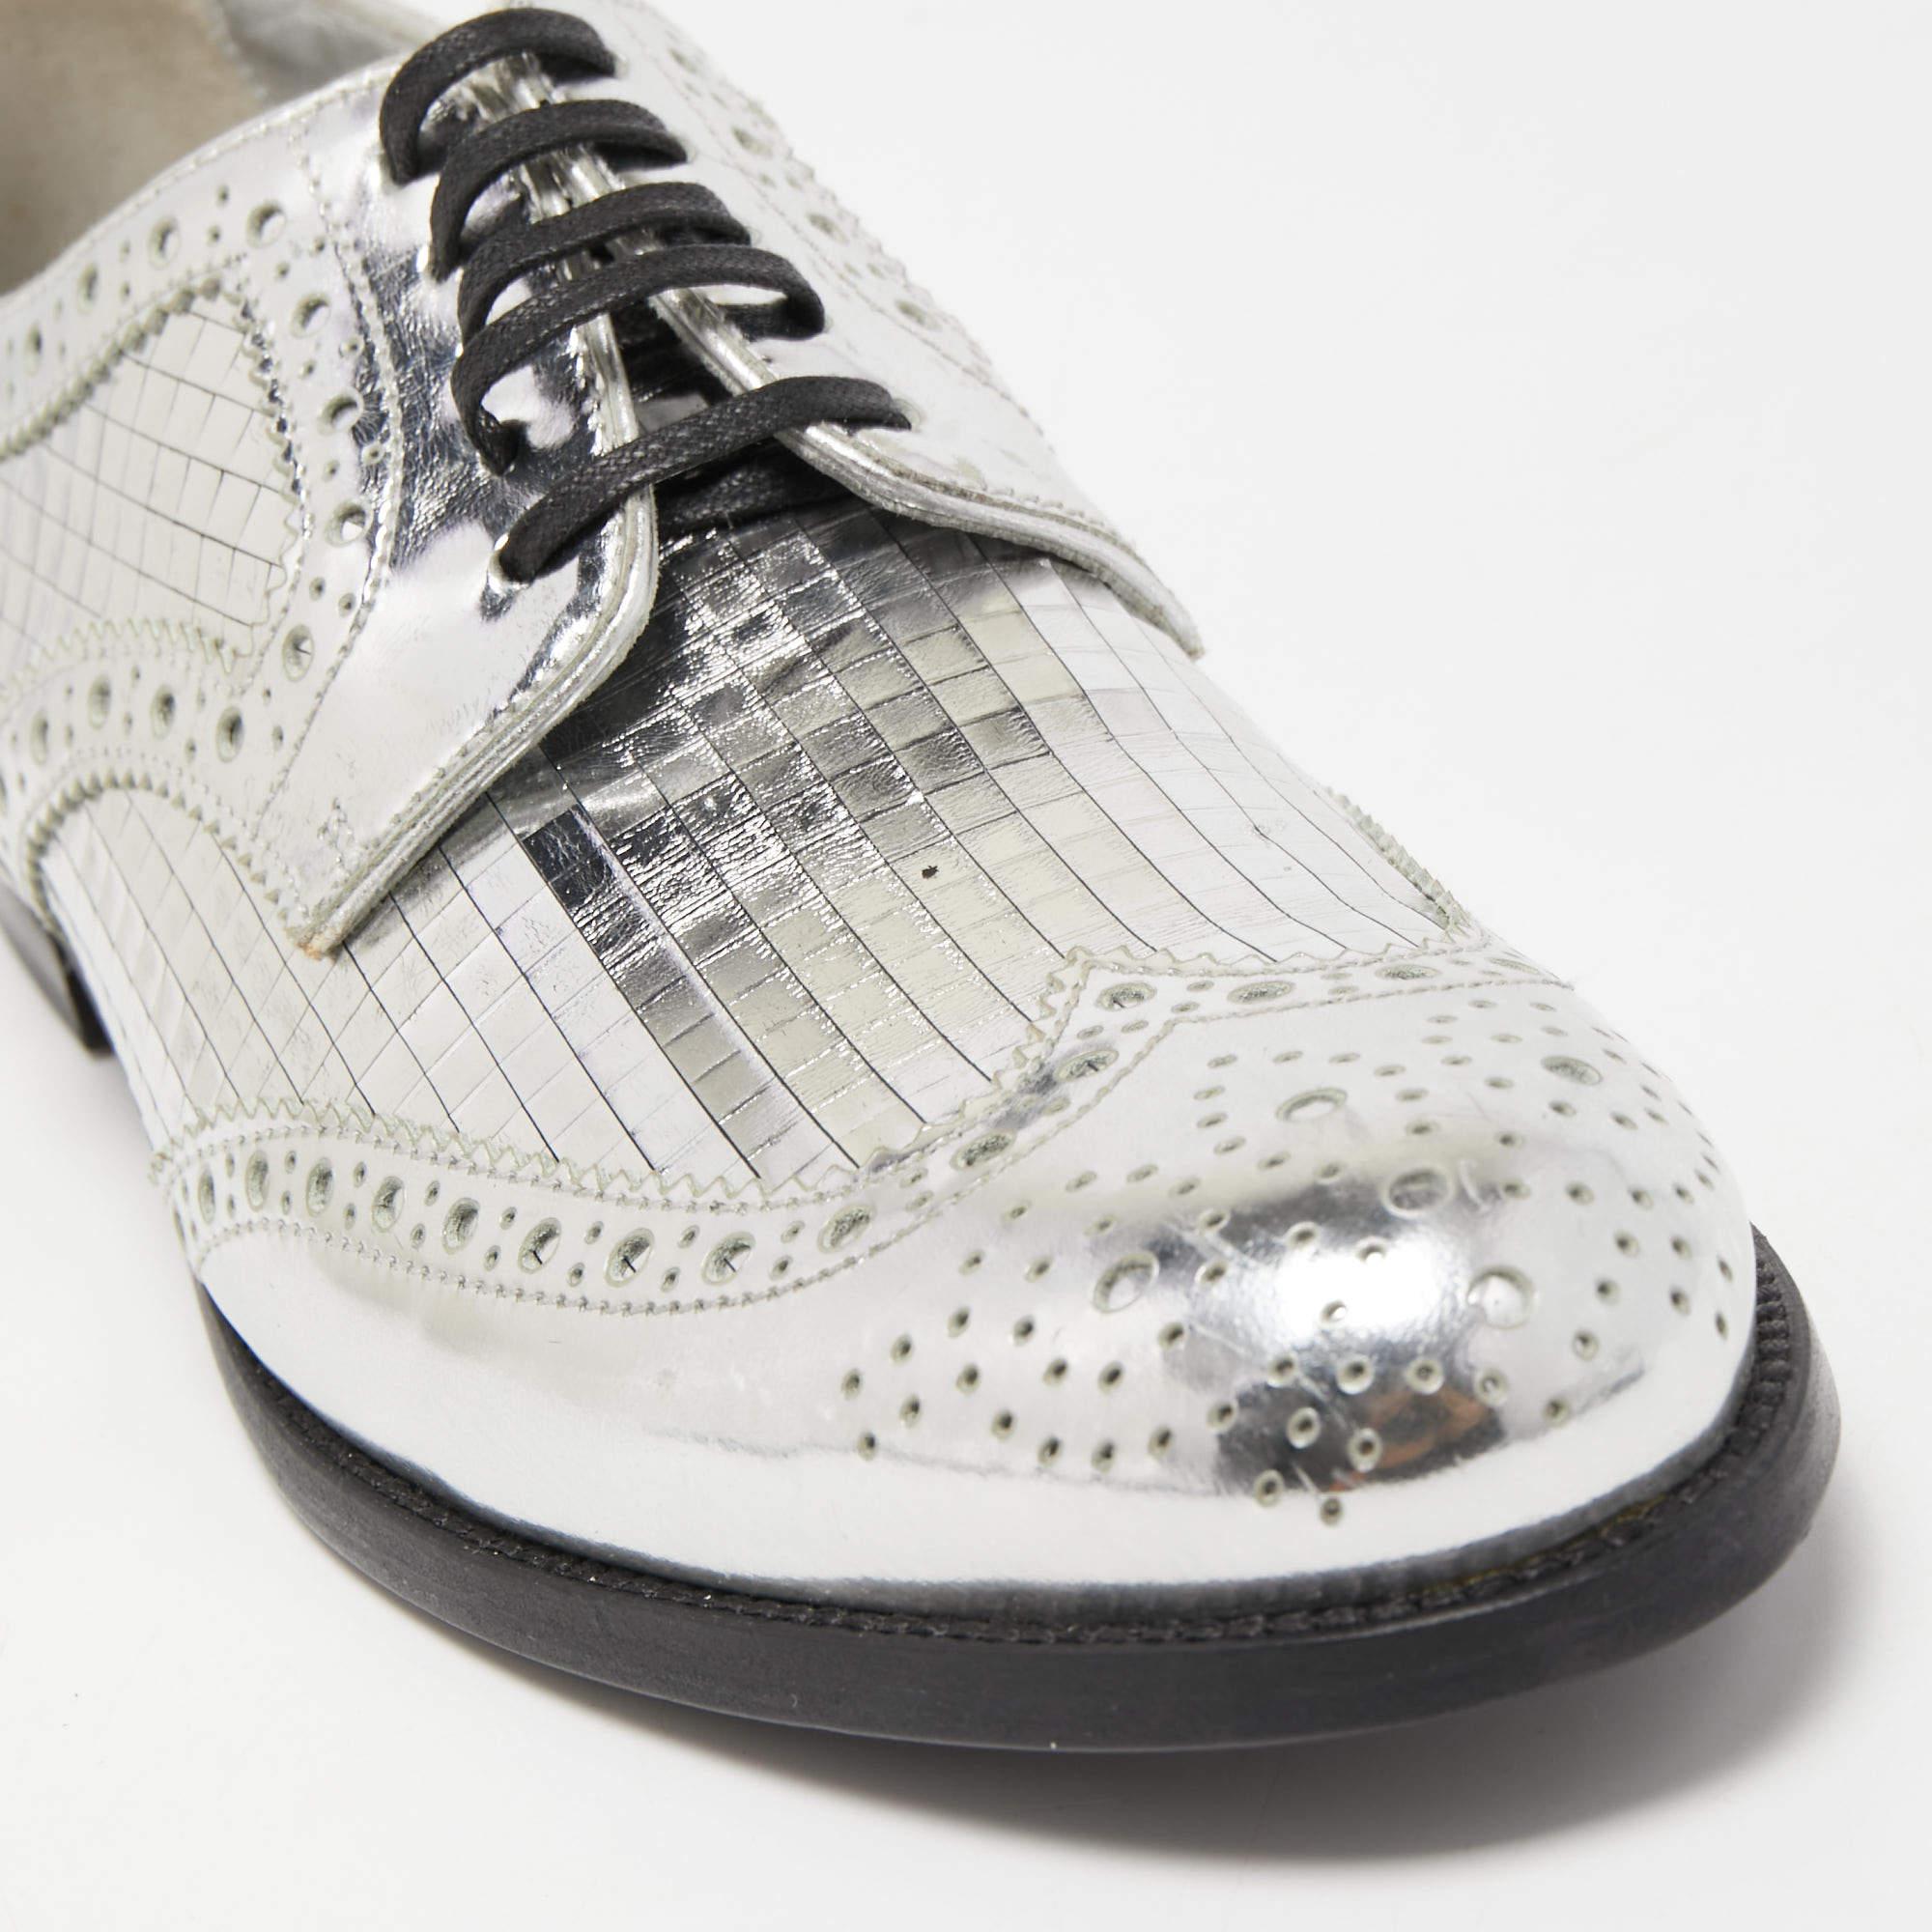 Dolce & Gabbana Silver Leather Disco Derby Brogues Size 38 2